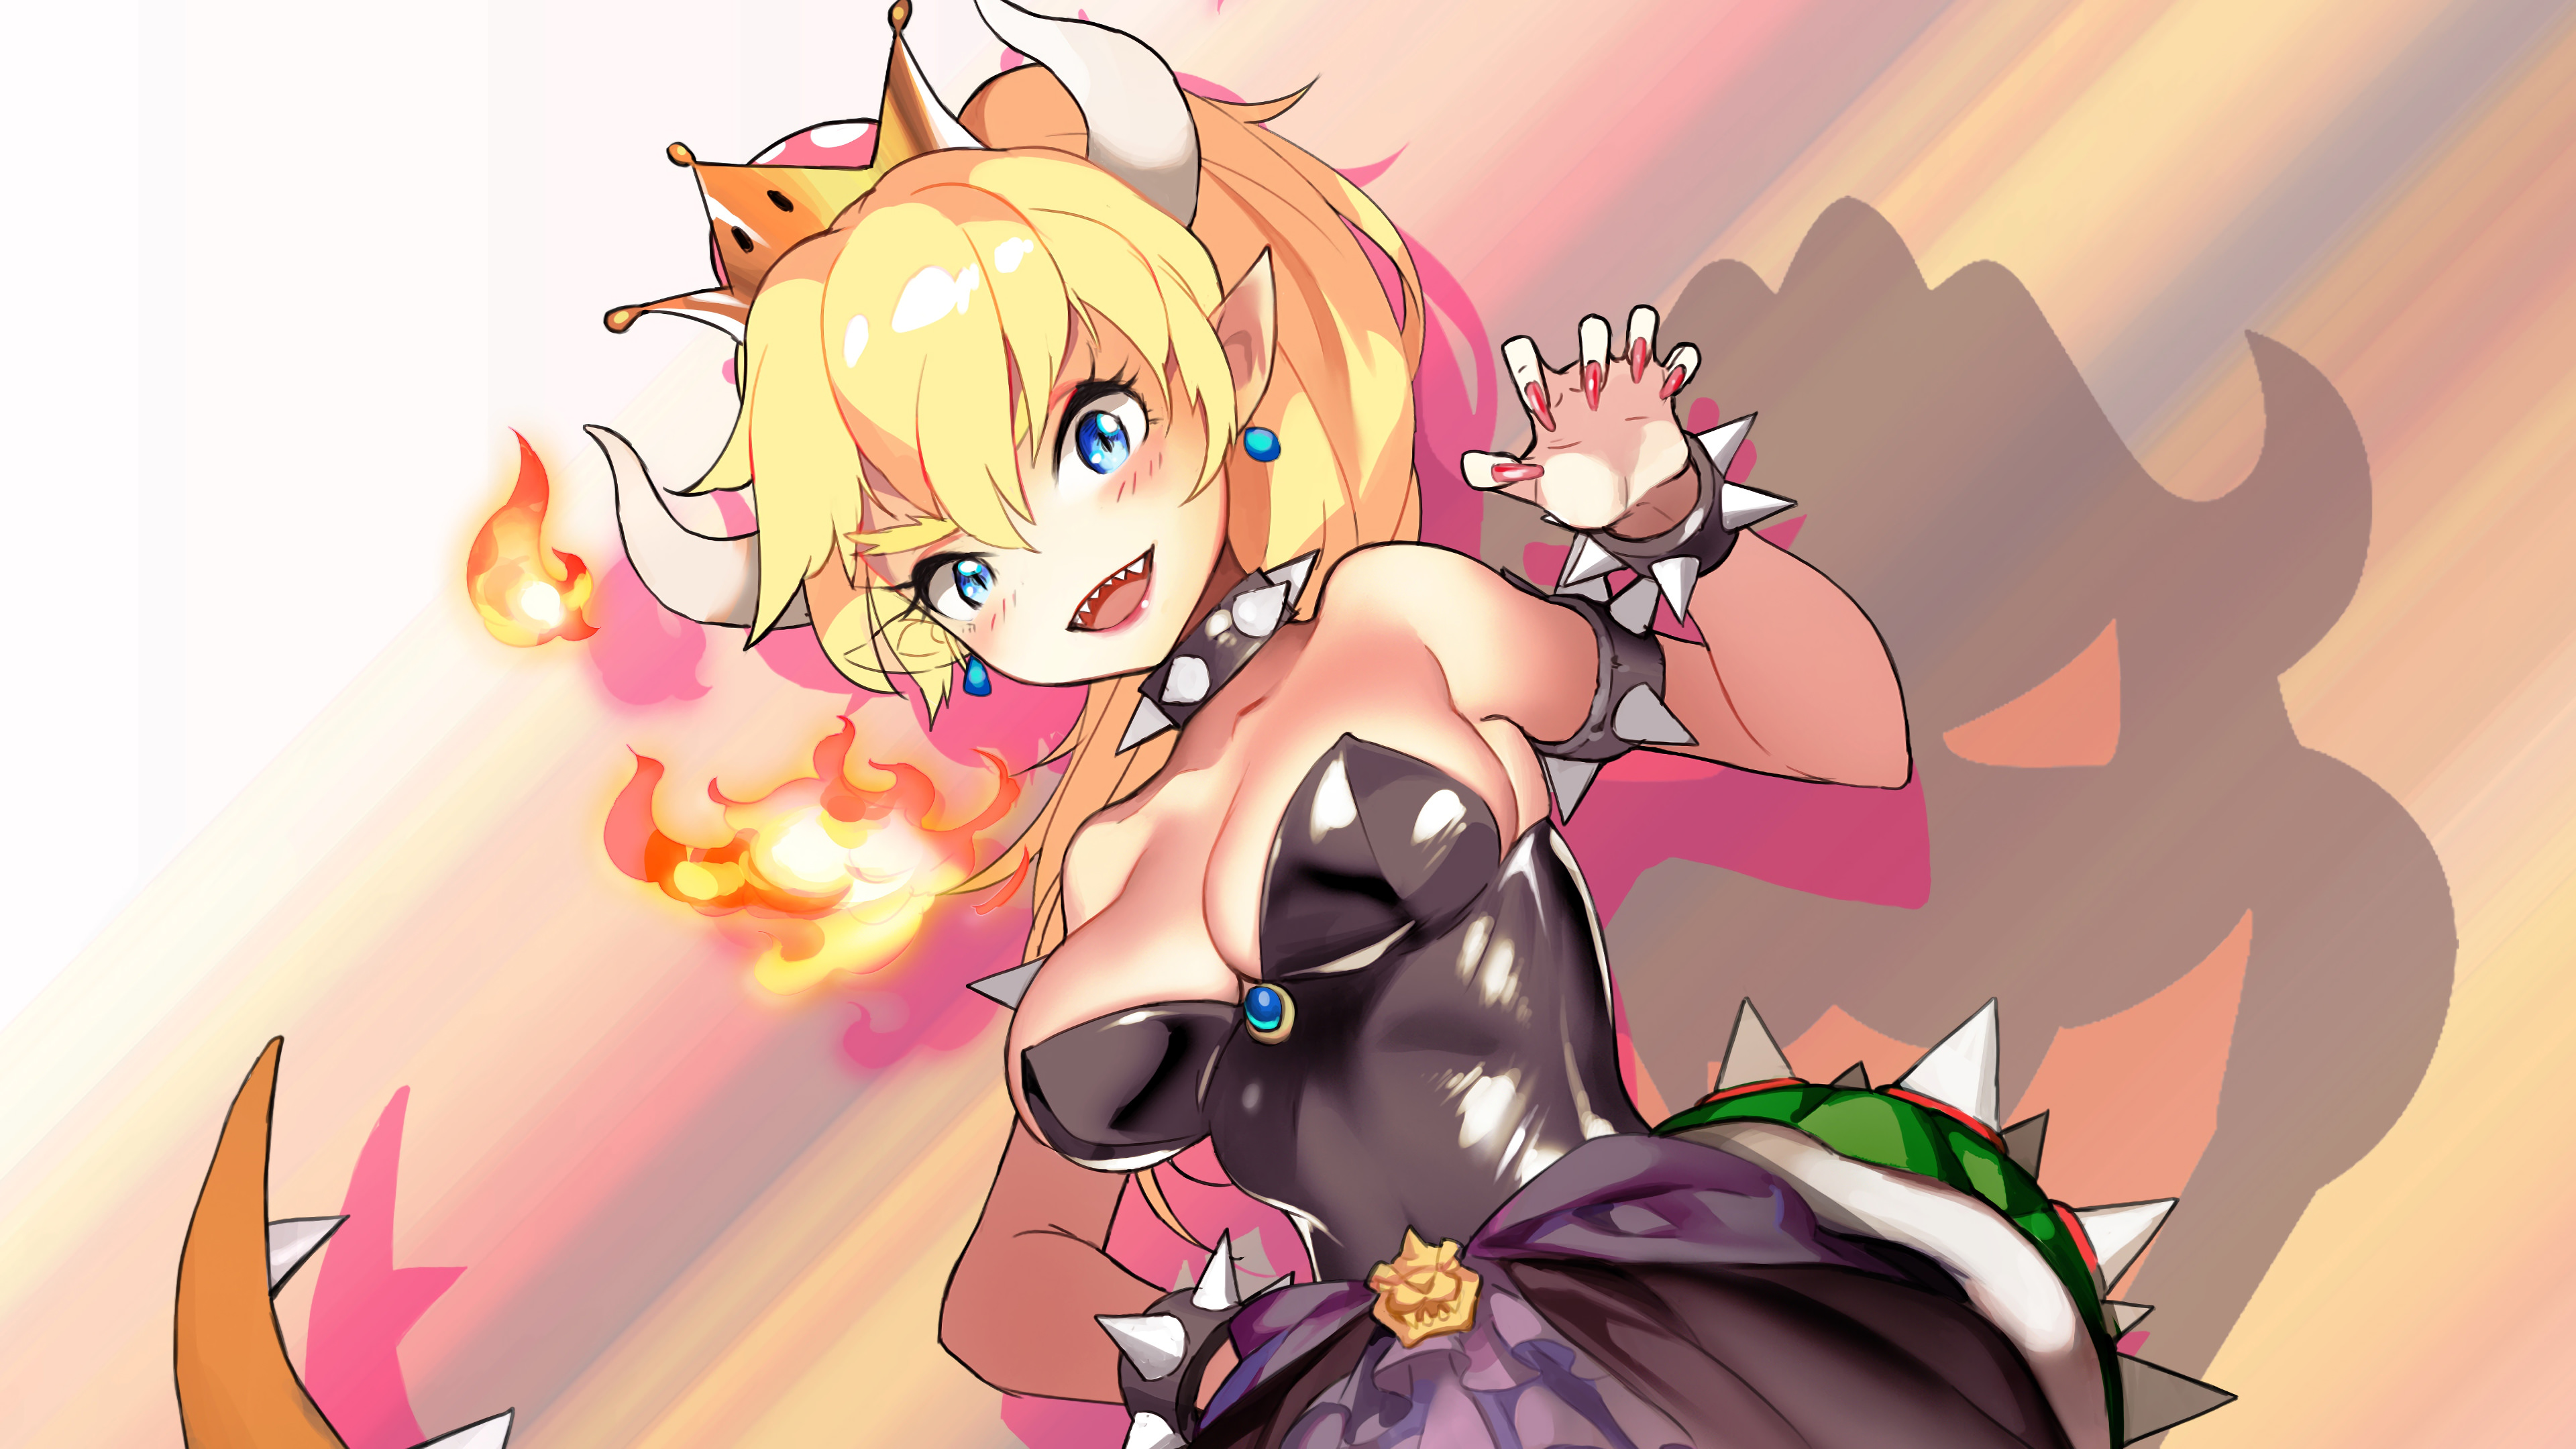 Anime 3840x2160 Bowsette anime big boobs boobs blonde horns anime girls Nintendo video games super crown video game girls necklace dress cleavage